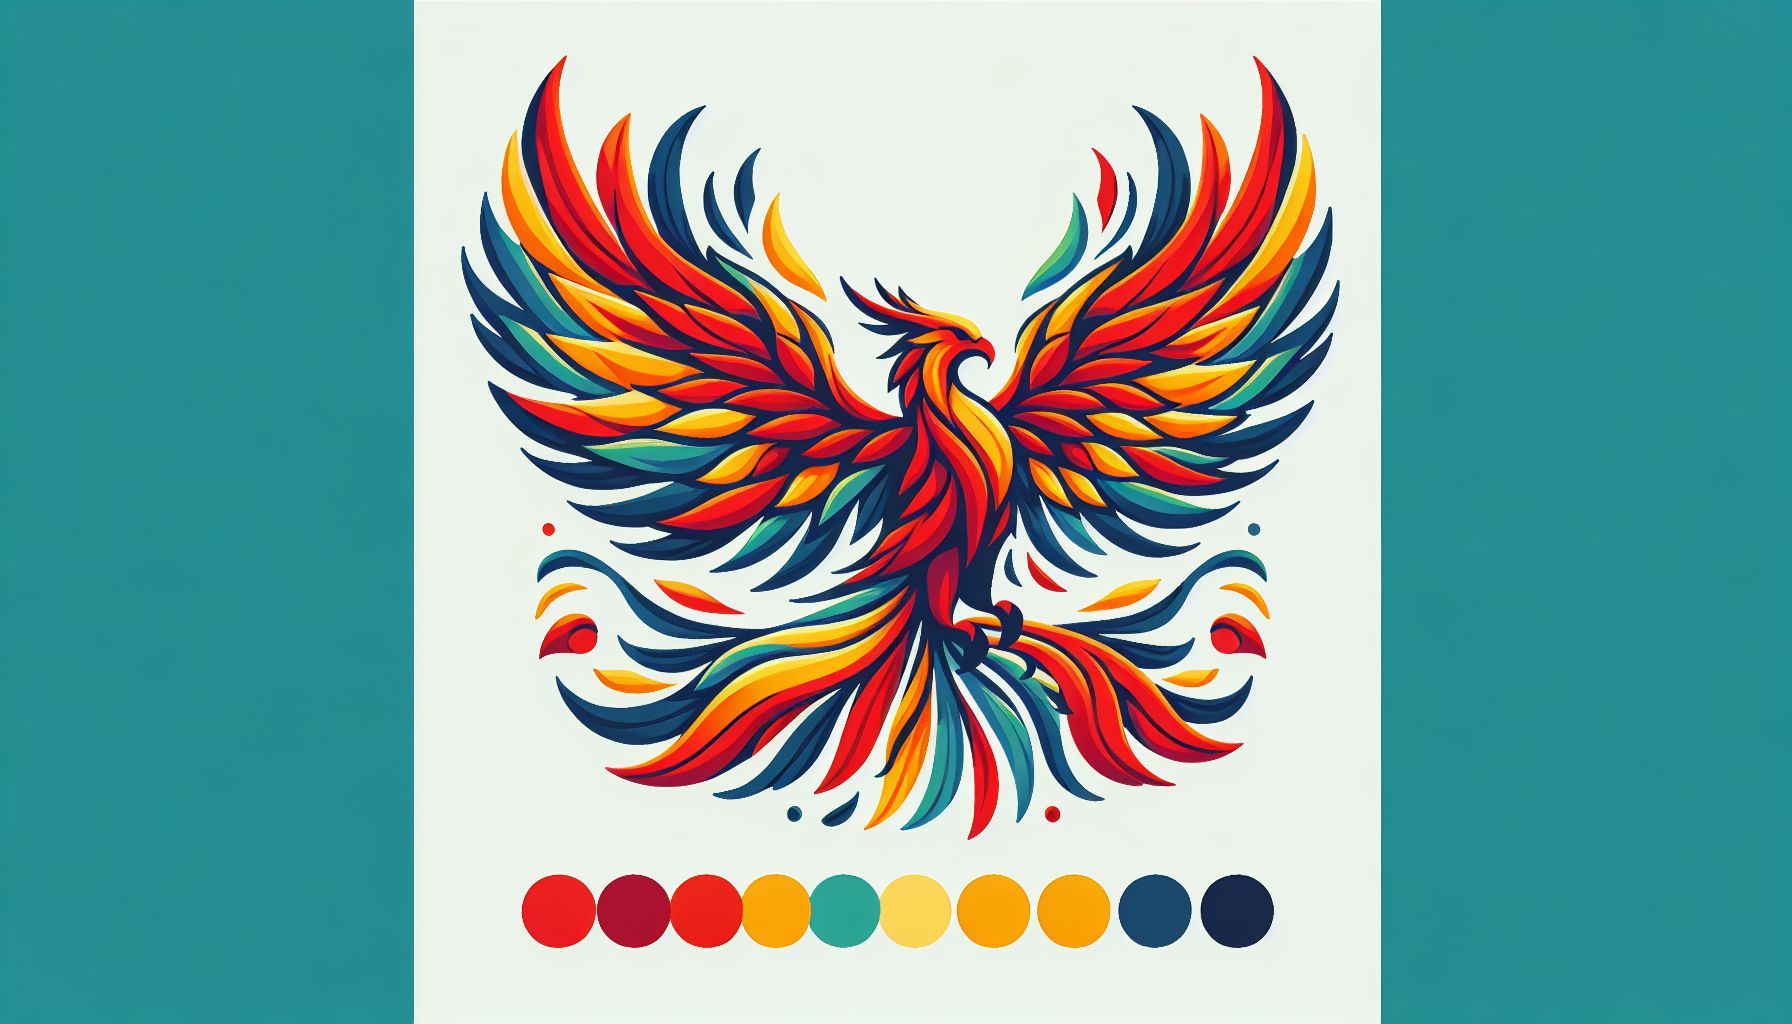 Phoenix in flat illustration style and white background, red #f47574, green #88c7a8, yellow #fcc44b, and blue #645bc8 colors.